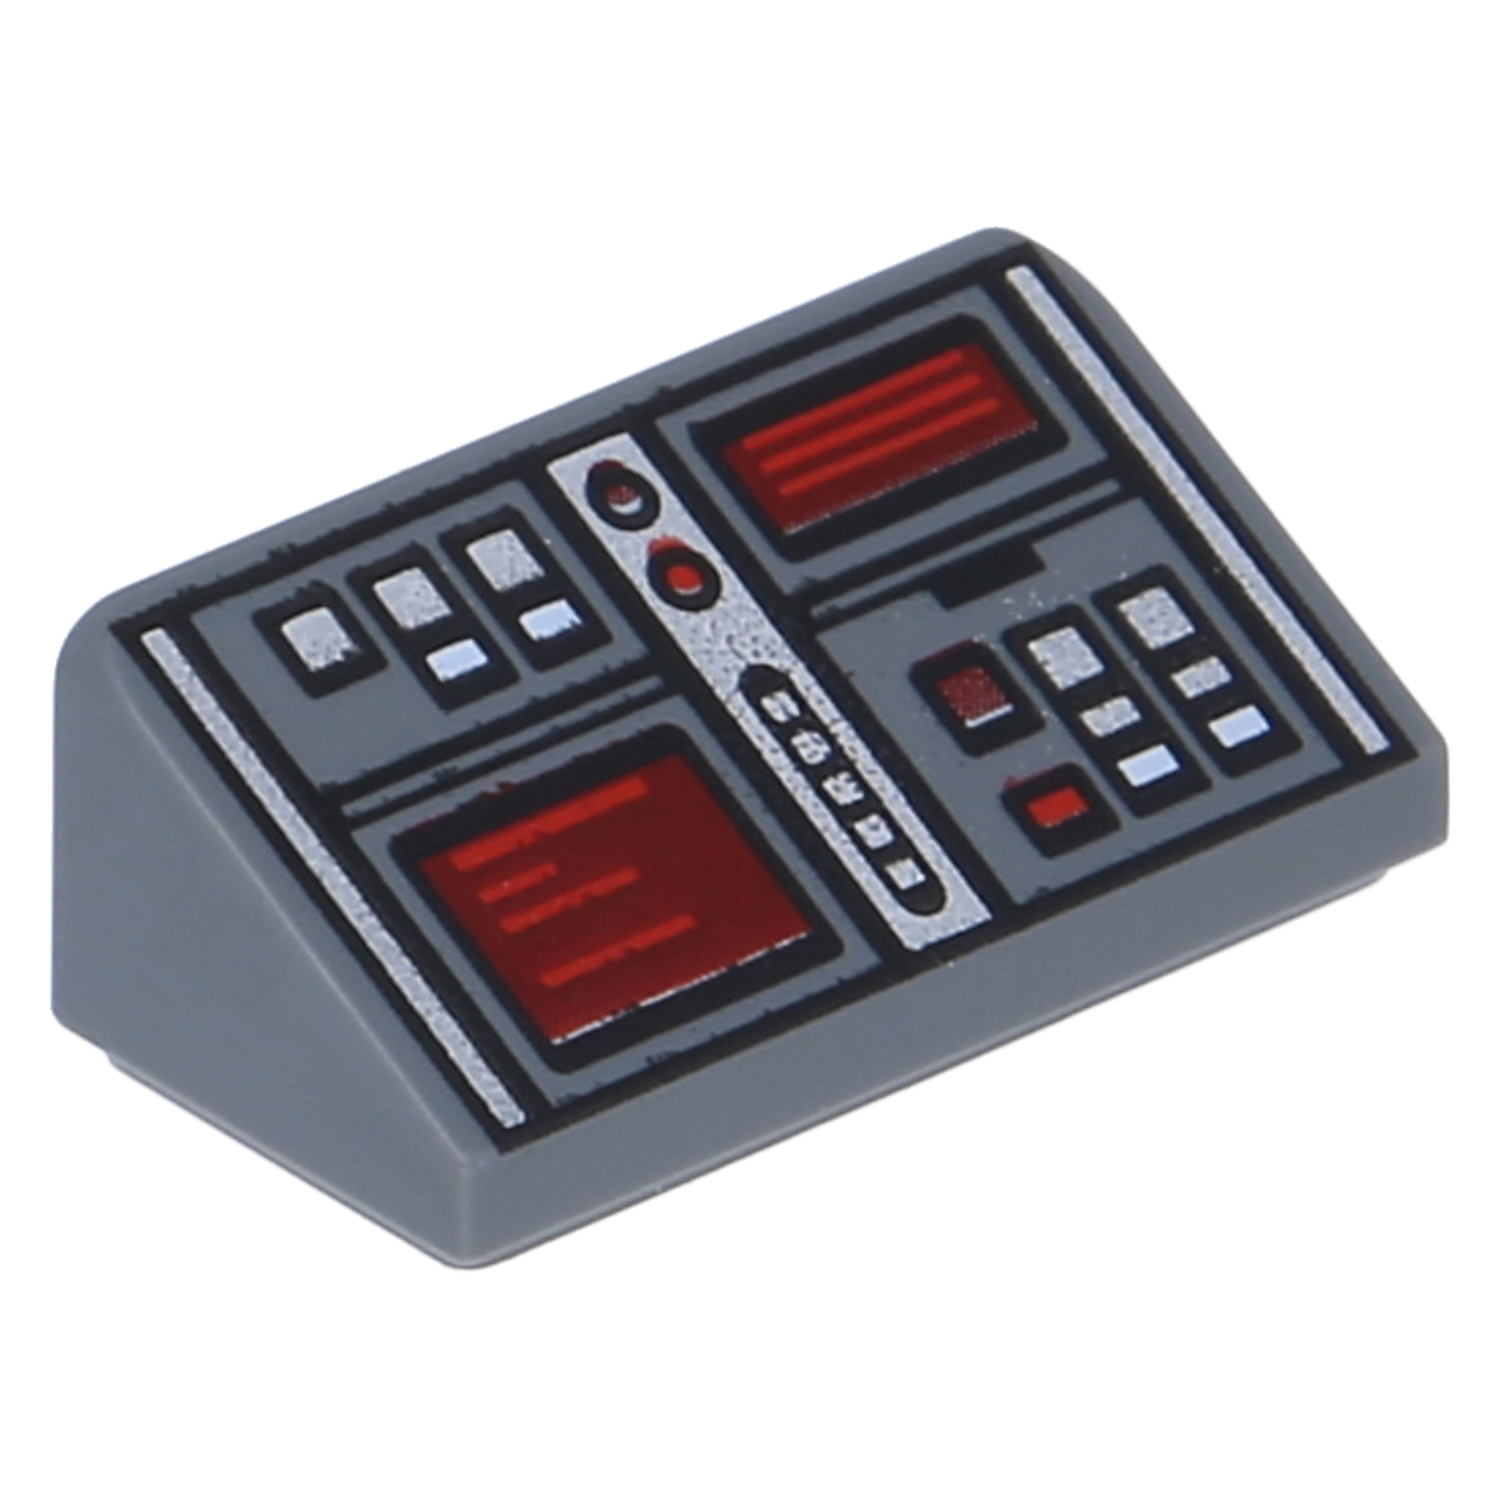 Lego roof stones (printed) - 1 x 2 x 2/3 with 2 red screens, red and white buttons (30 °)